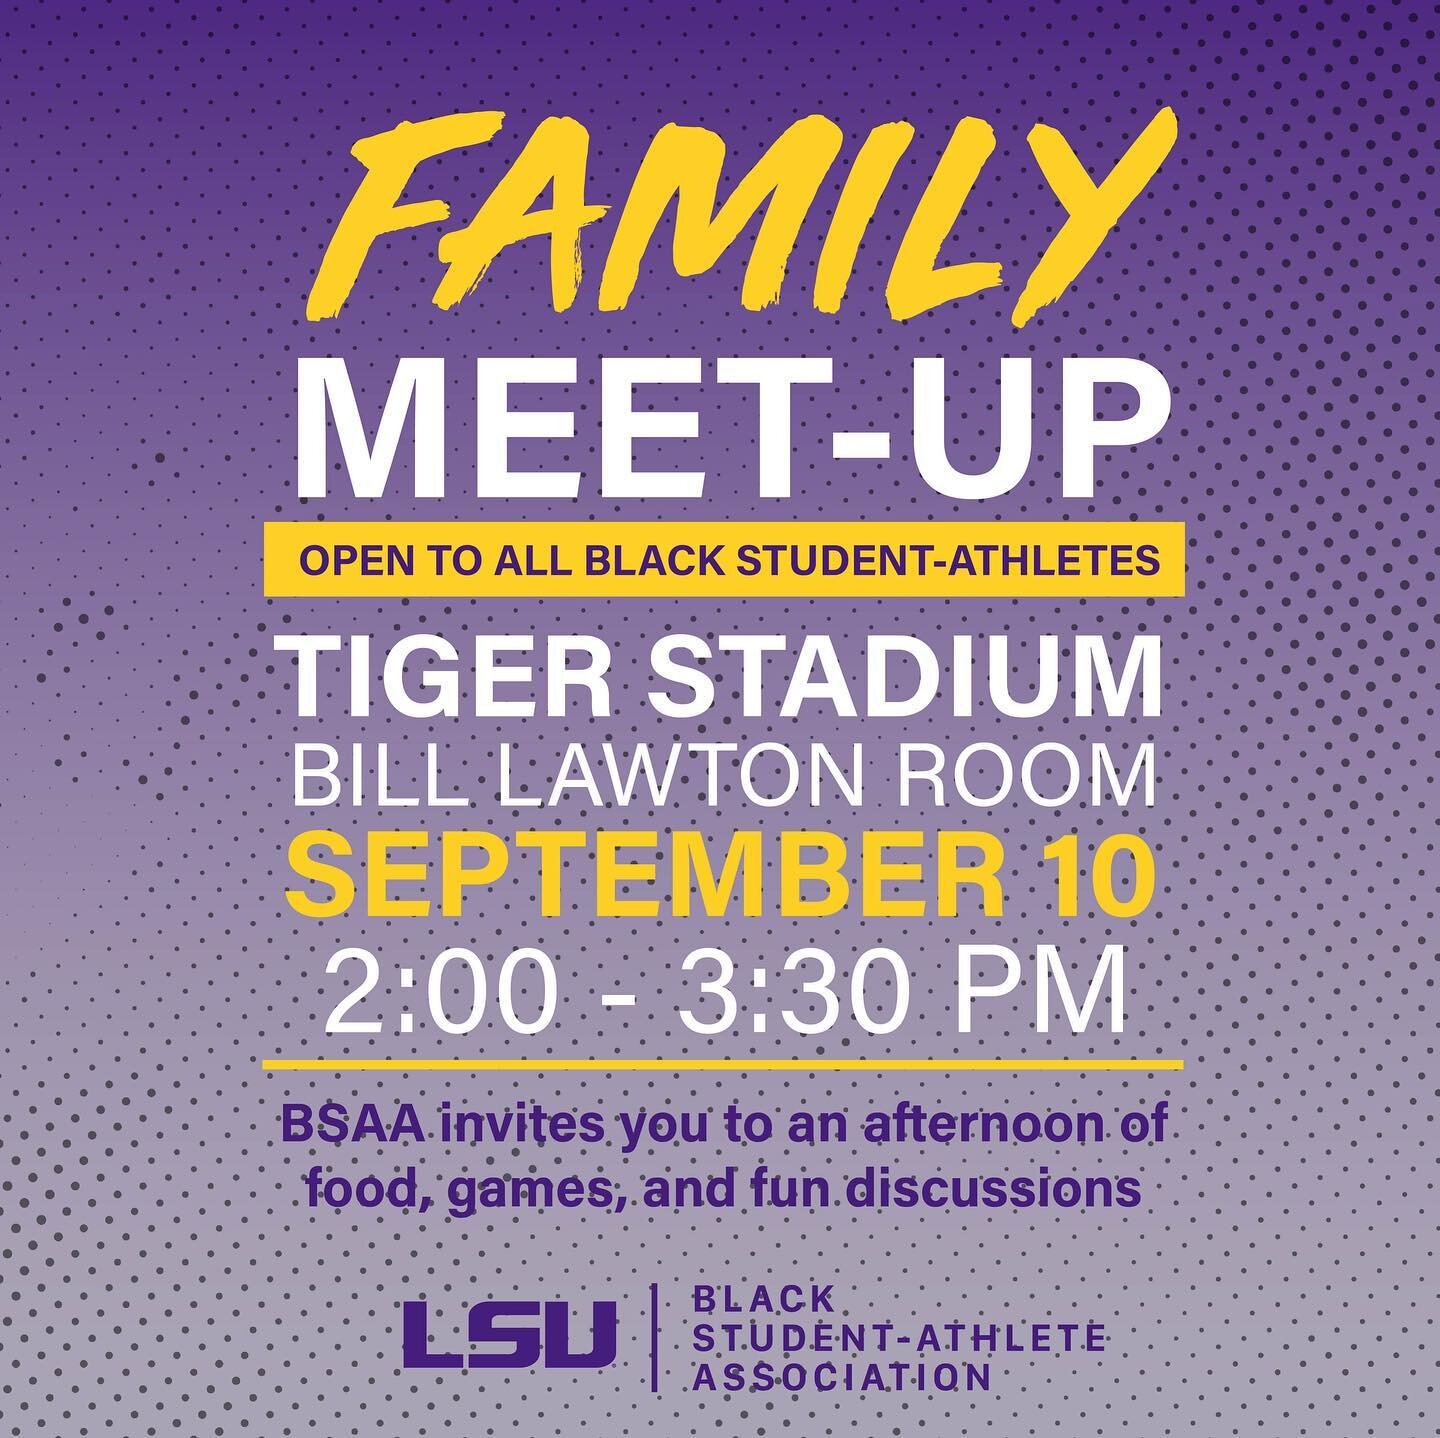 We ARE family here at BSAA! Come join us on September 10th for our Family Meet-up. We hope to see you there!

Family Meet-Ups are monthly safe spaces hosted by BSAA for black student-athletes to be heard! We encourage healthy discussions about curren